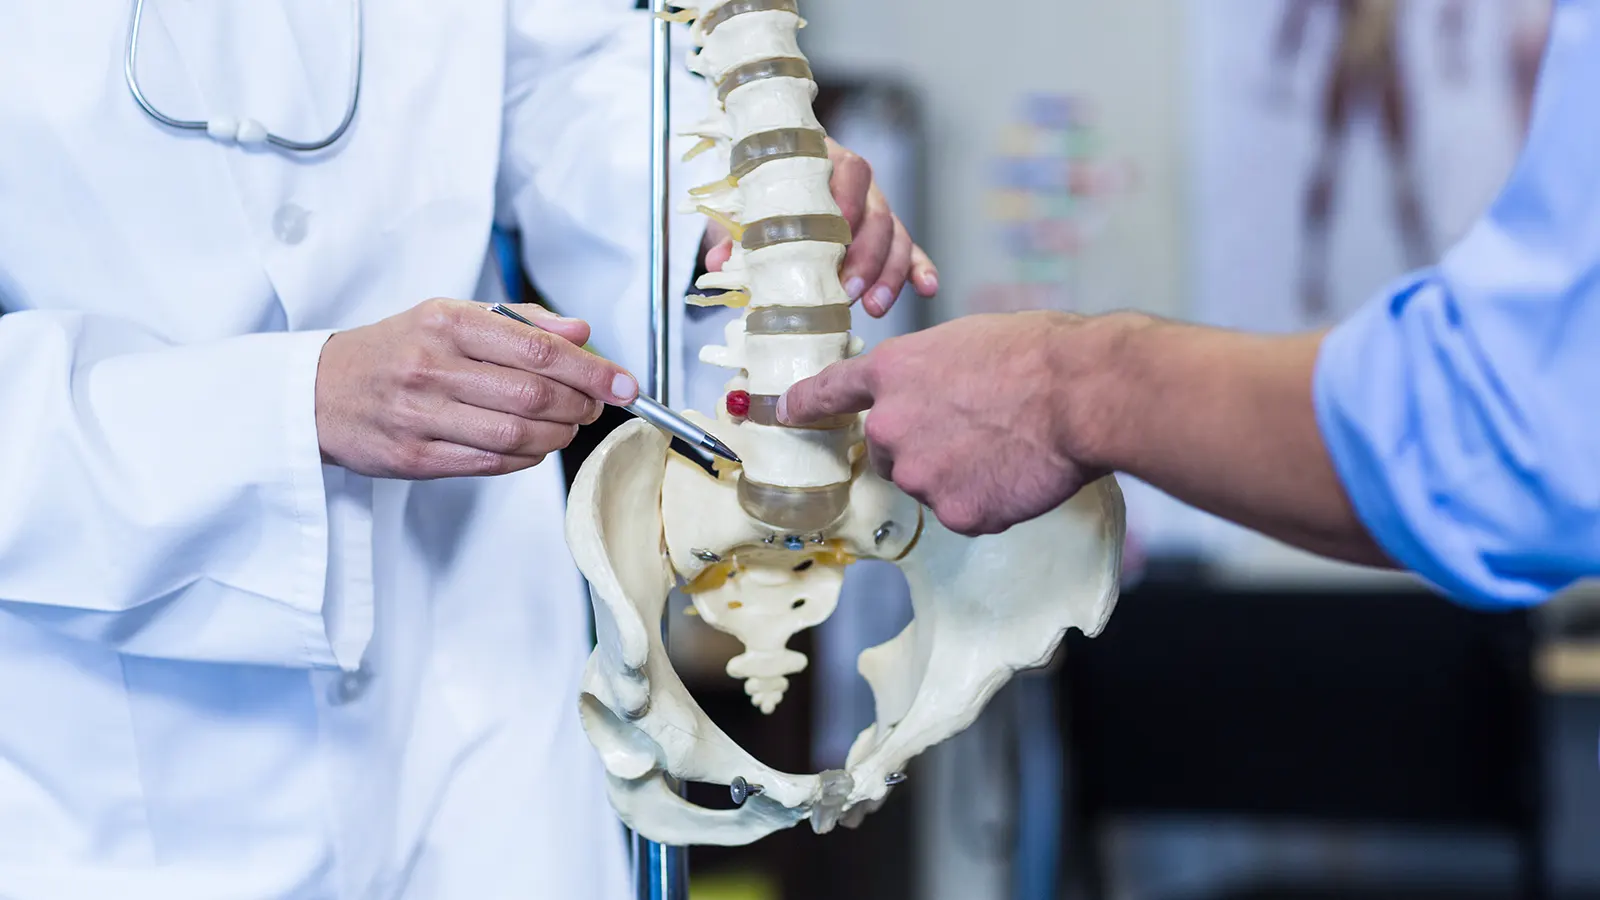 What is Spinal Stenosis?